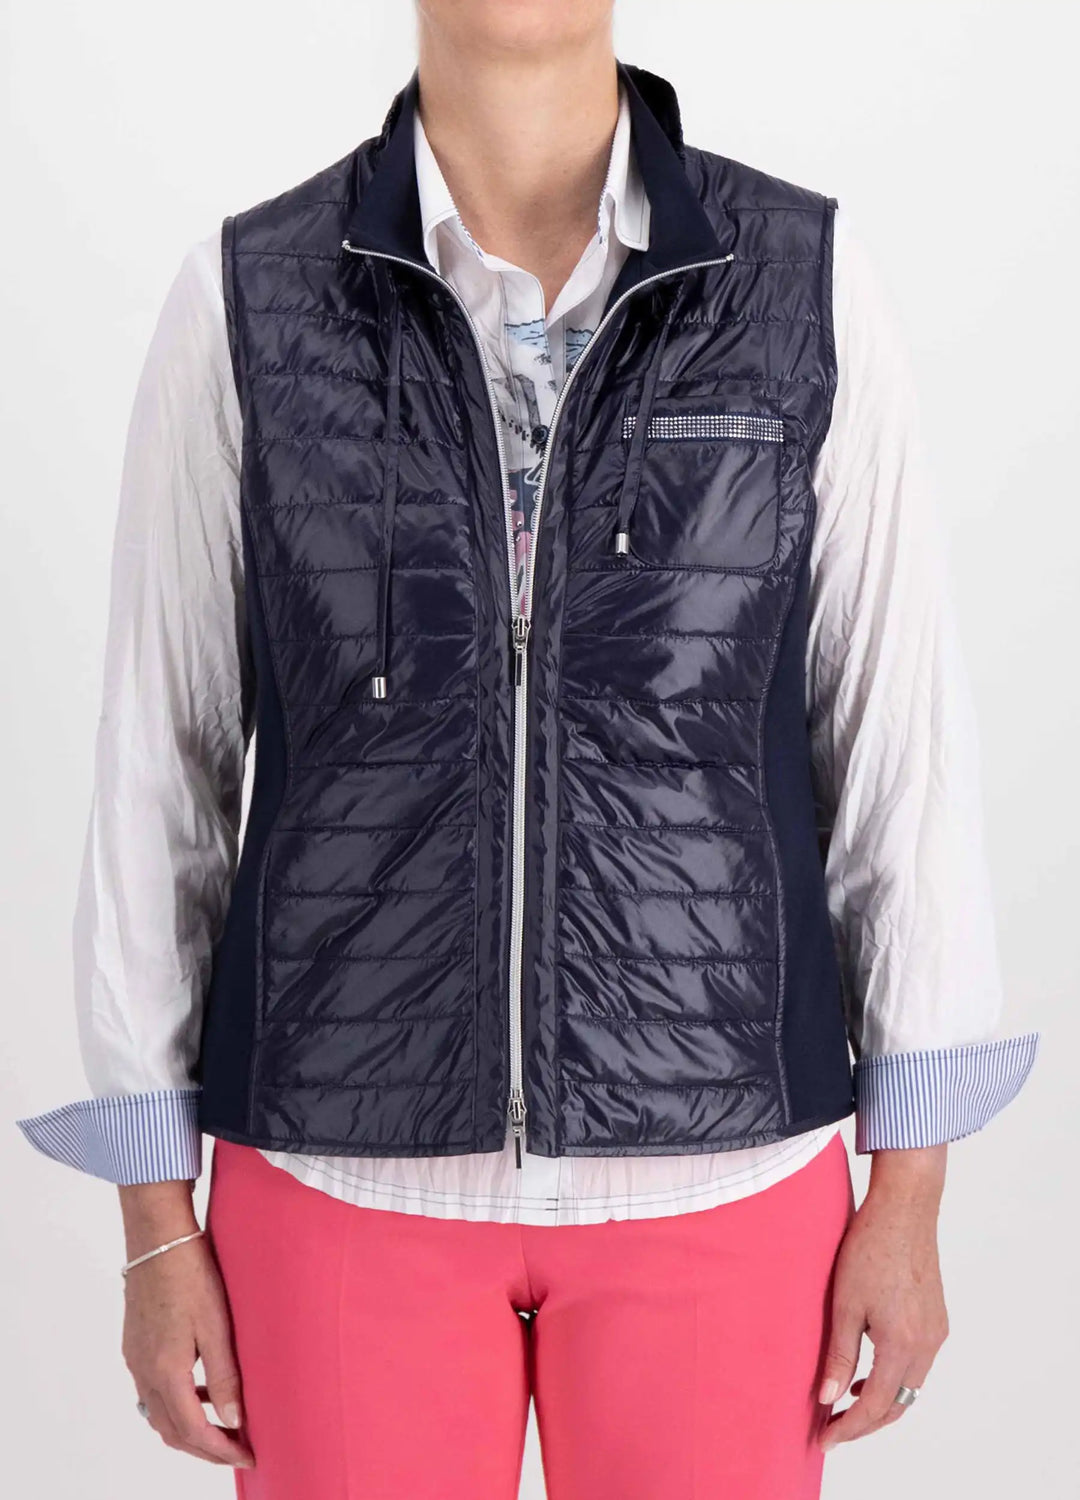 Just White Gilet Style J4120-750